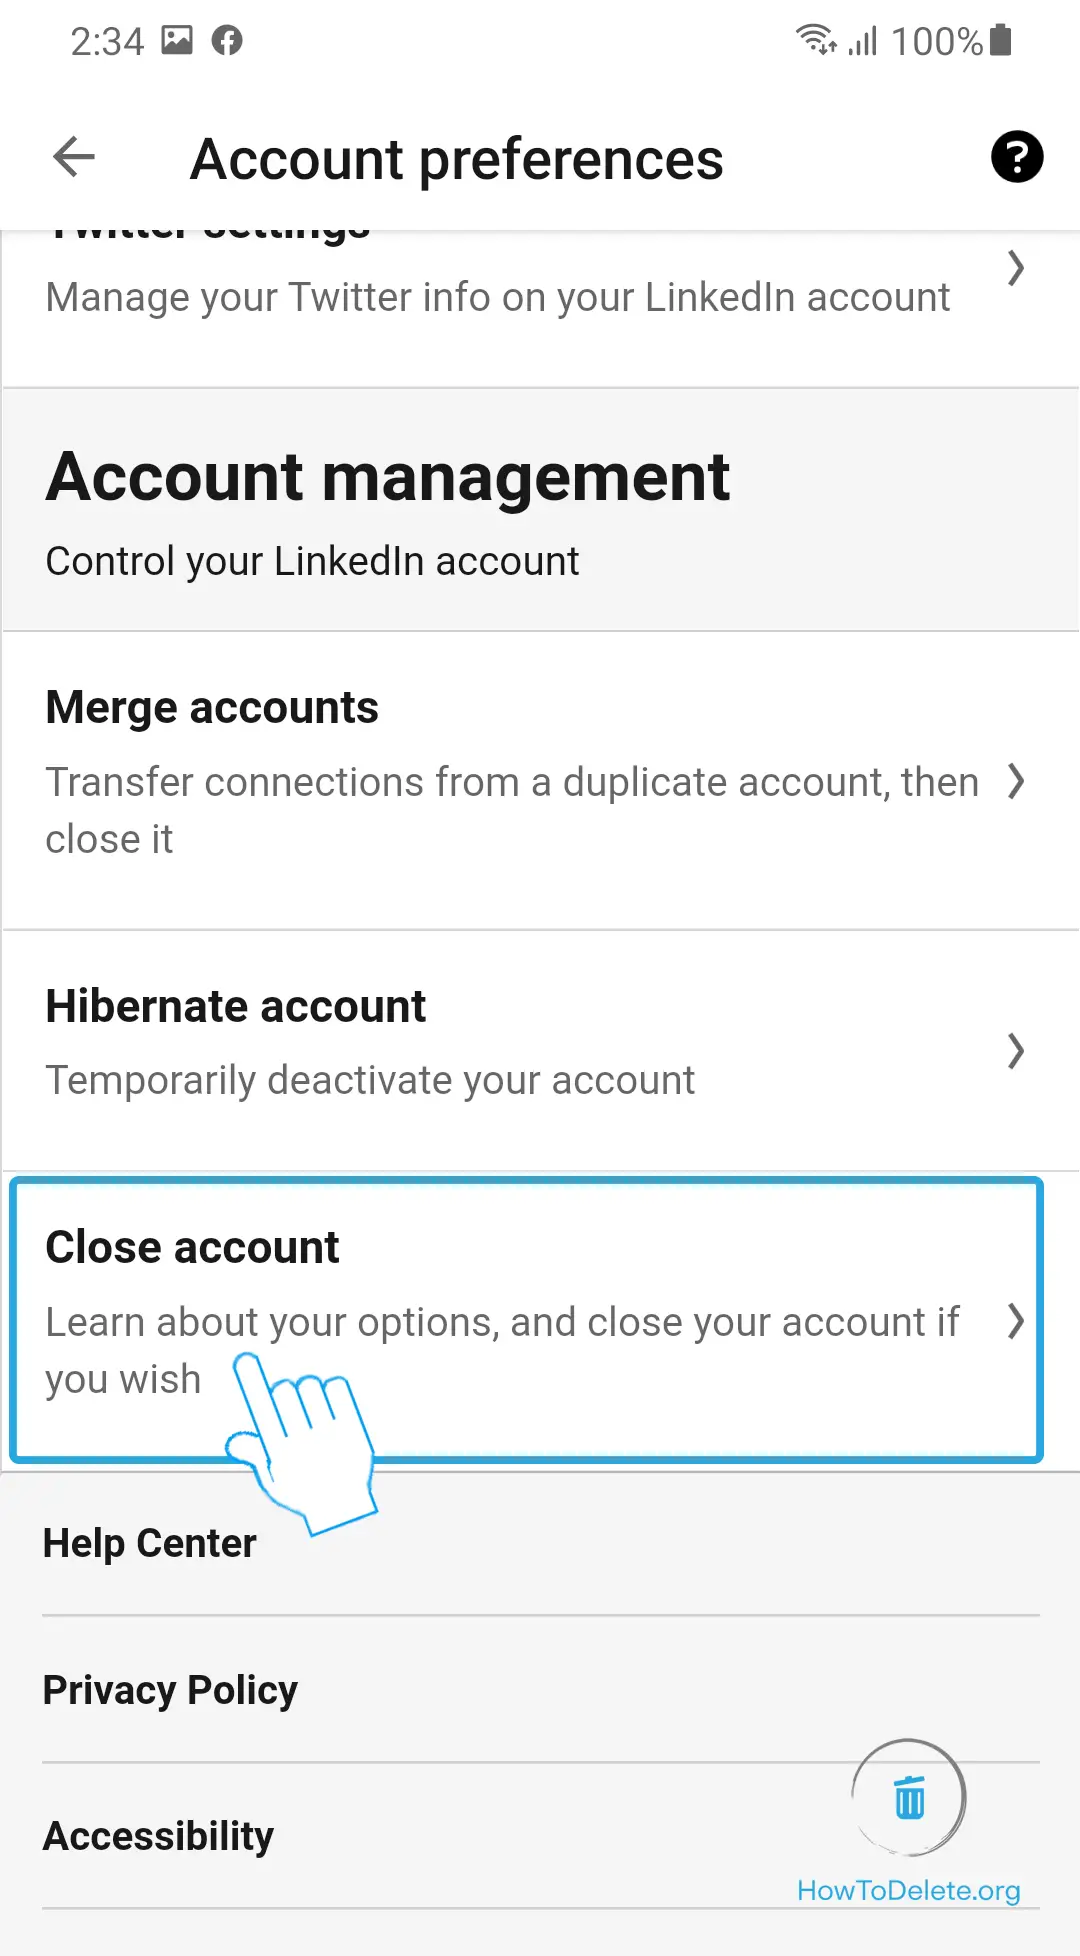 How to Delete your LinkedIn Account in 20 [Updated] - HowToDelete